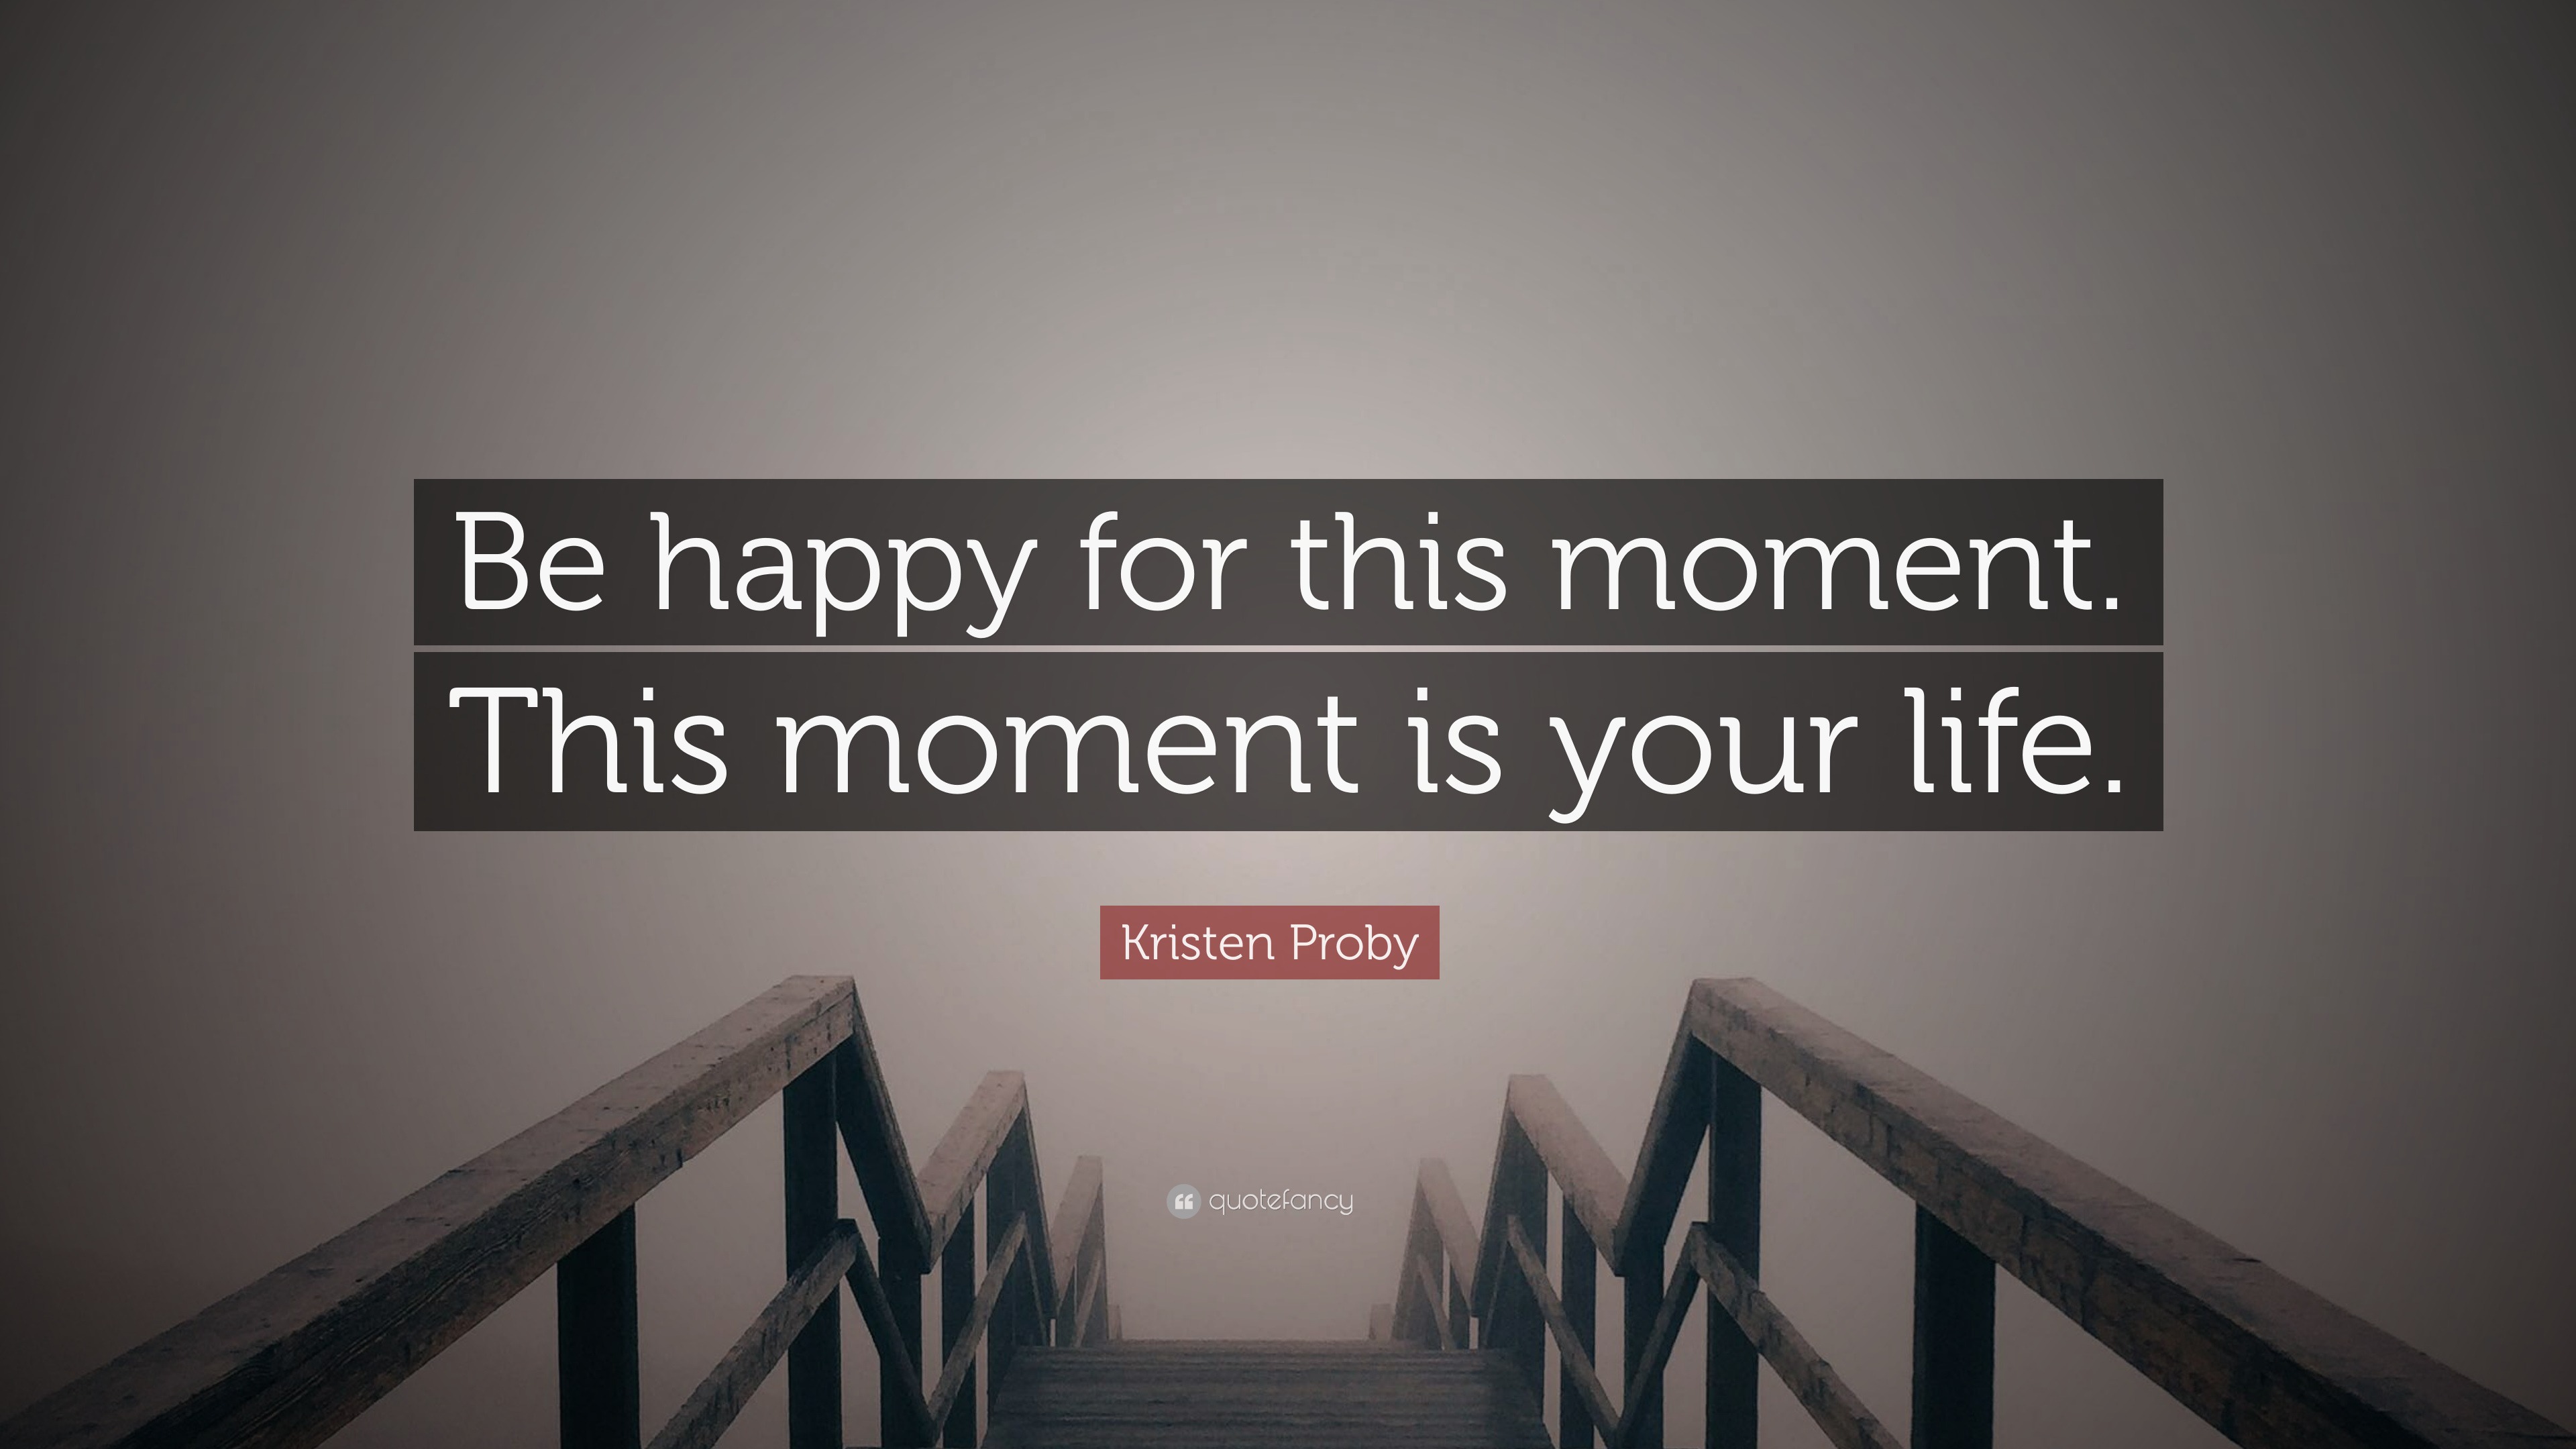 Kristen Proby Quote “Be happy for this moment This moment is your life